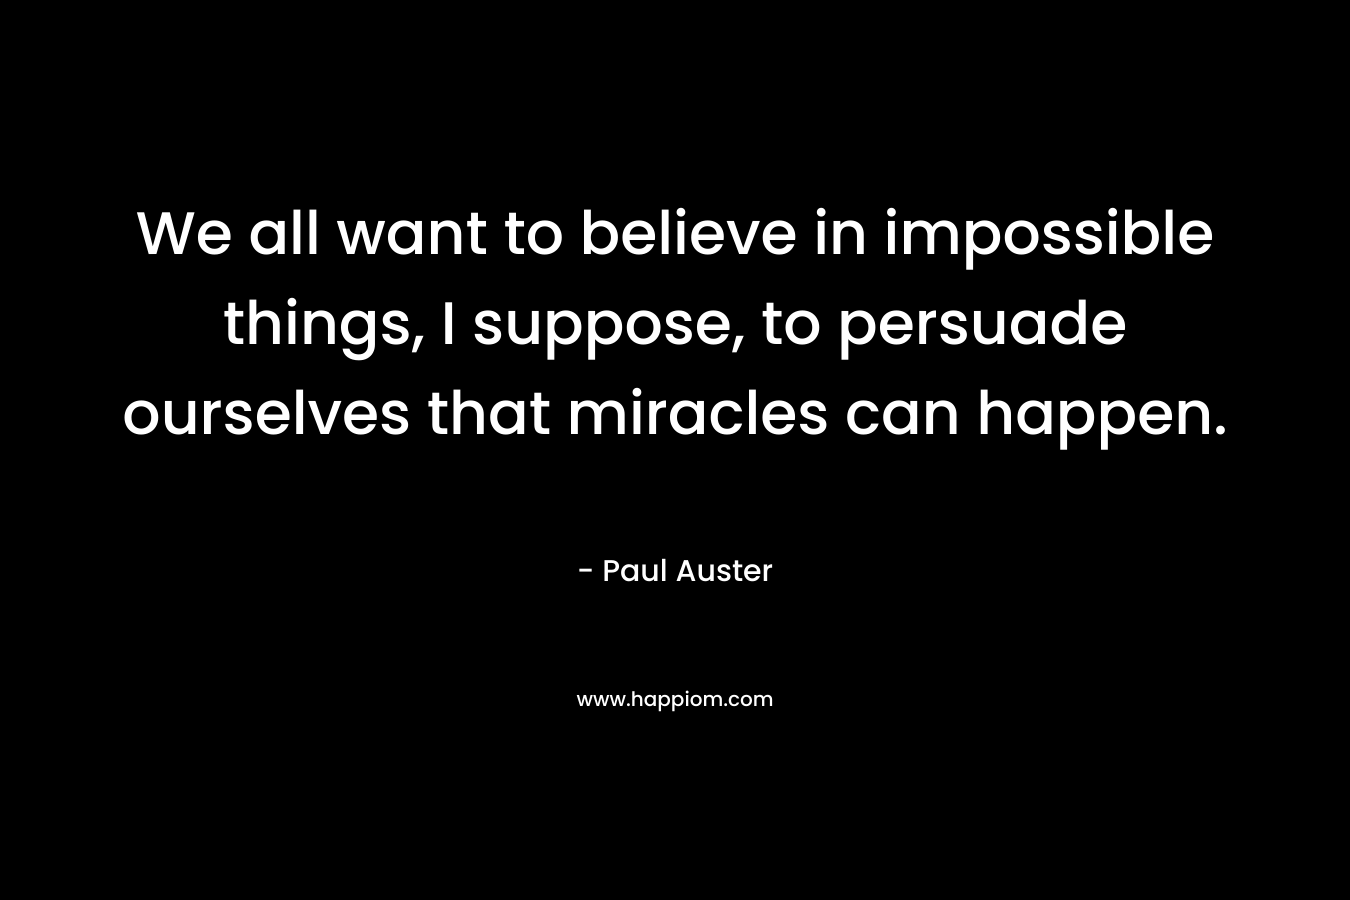 We all want to believe in impossible things, I suppose, to persuade ourselves that miracles can happen. – Paul Auster